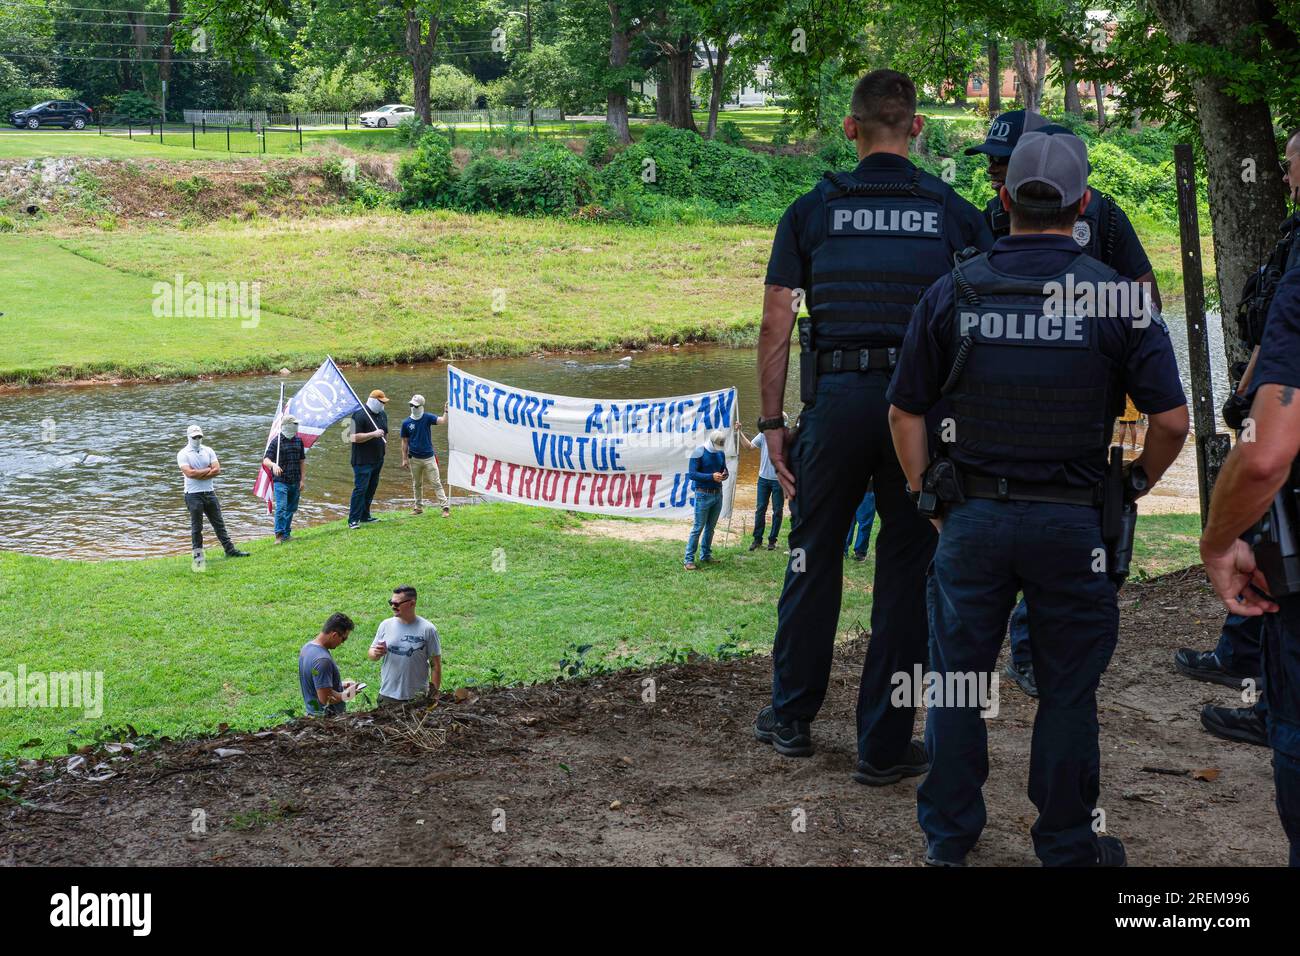 Prattville, Alabama, USA-June 24, 2023: Prattville police officers observing members of Patriot Front, a white nationalist, neo-fascist hate group, wh Stock Photo